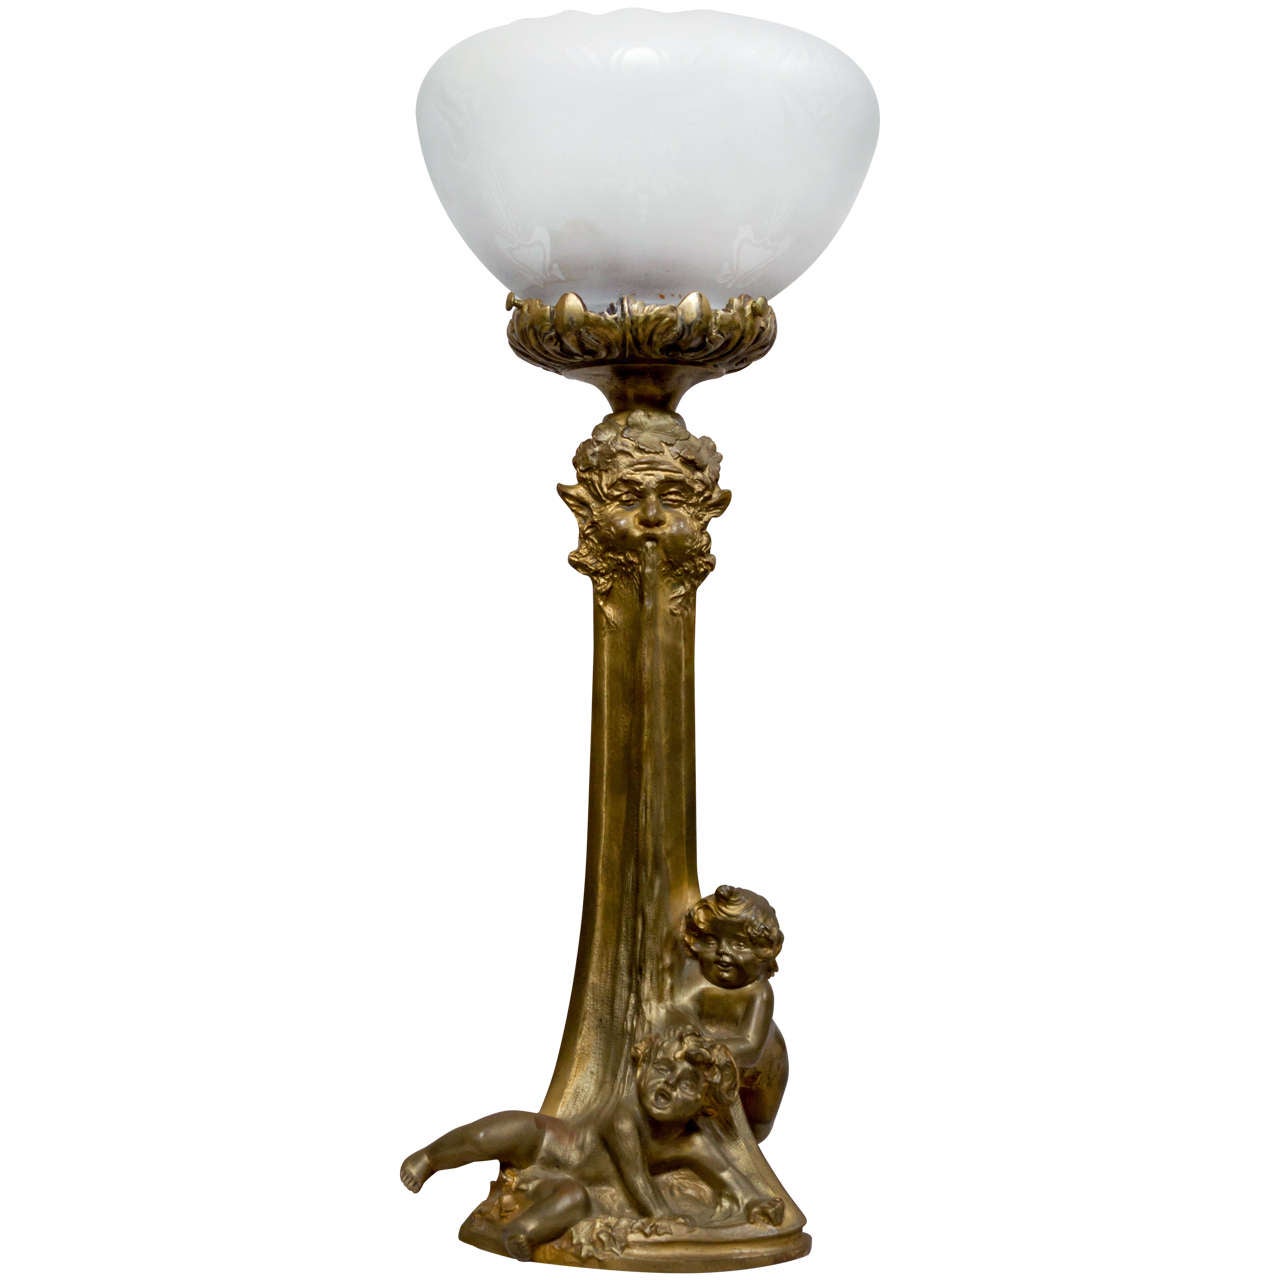 Whimsical French Art Nouveau Figural Lamp with Children, Louchet Foundry